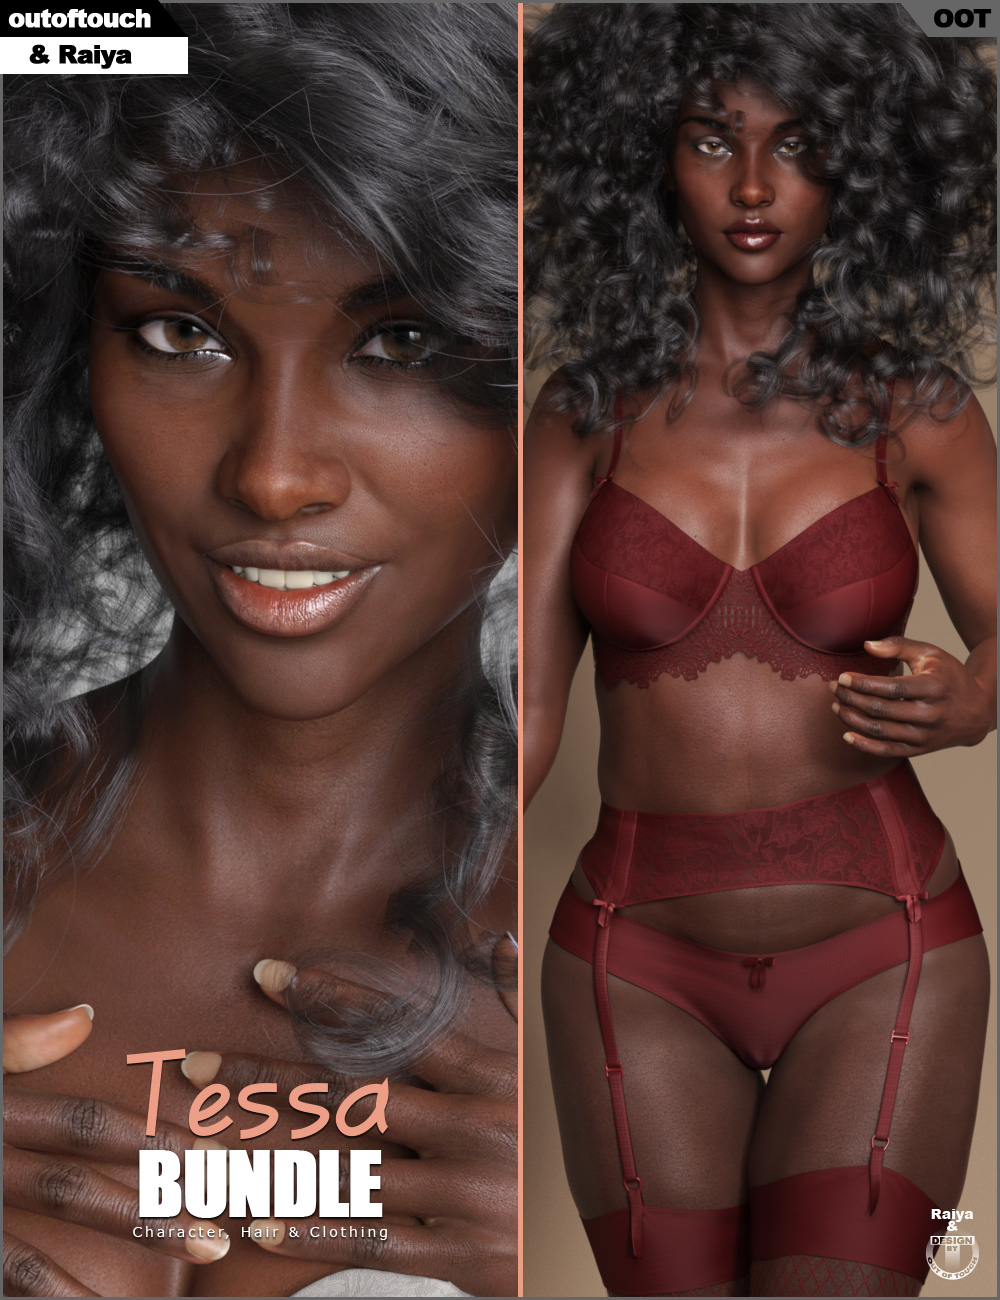 Tessa Character, Hair & Clothing Bundle by: Raiyaoutoftouch, 3D Models by Daz 3D